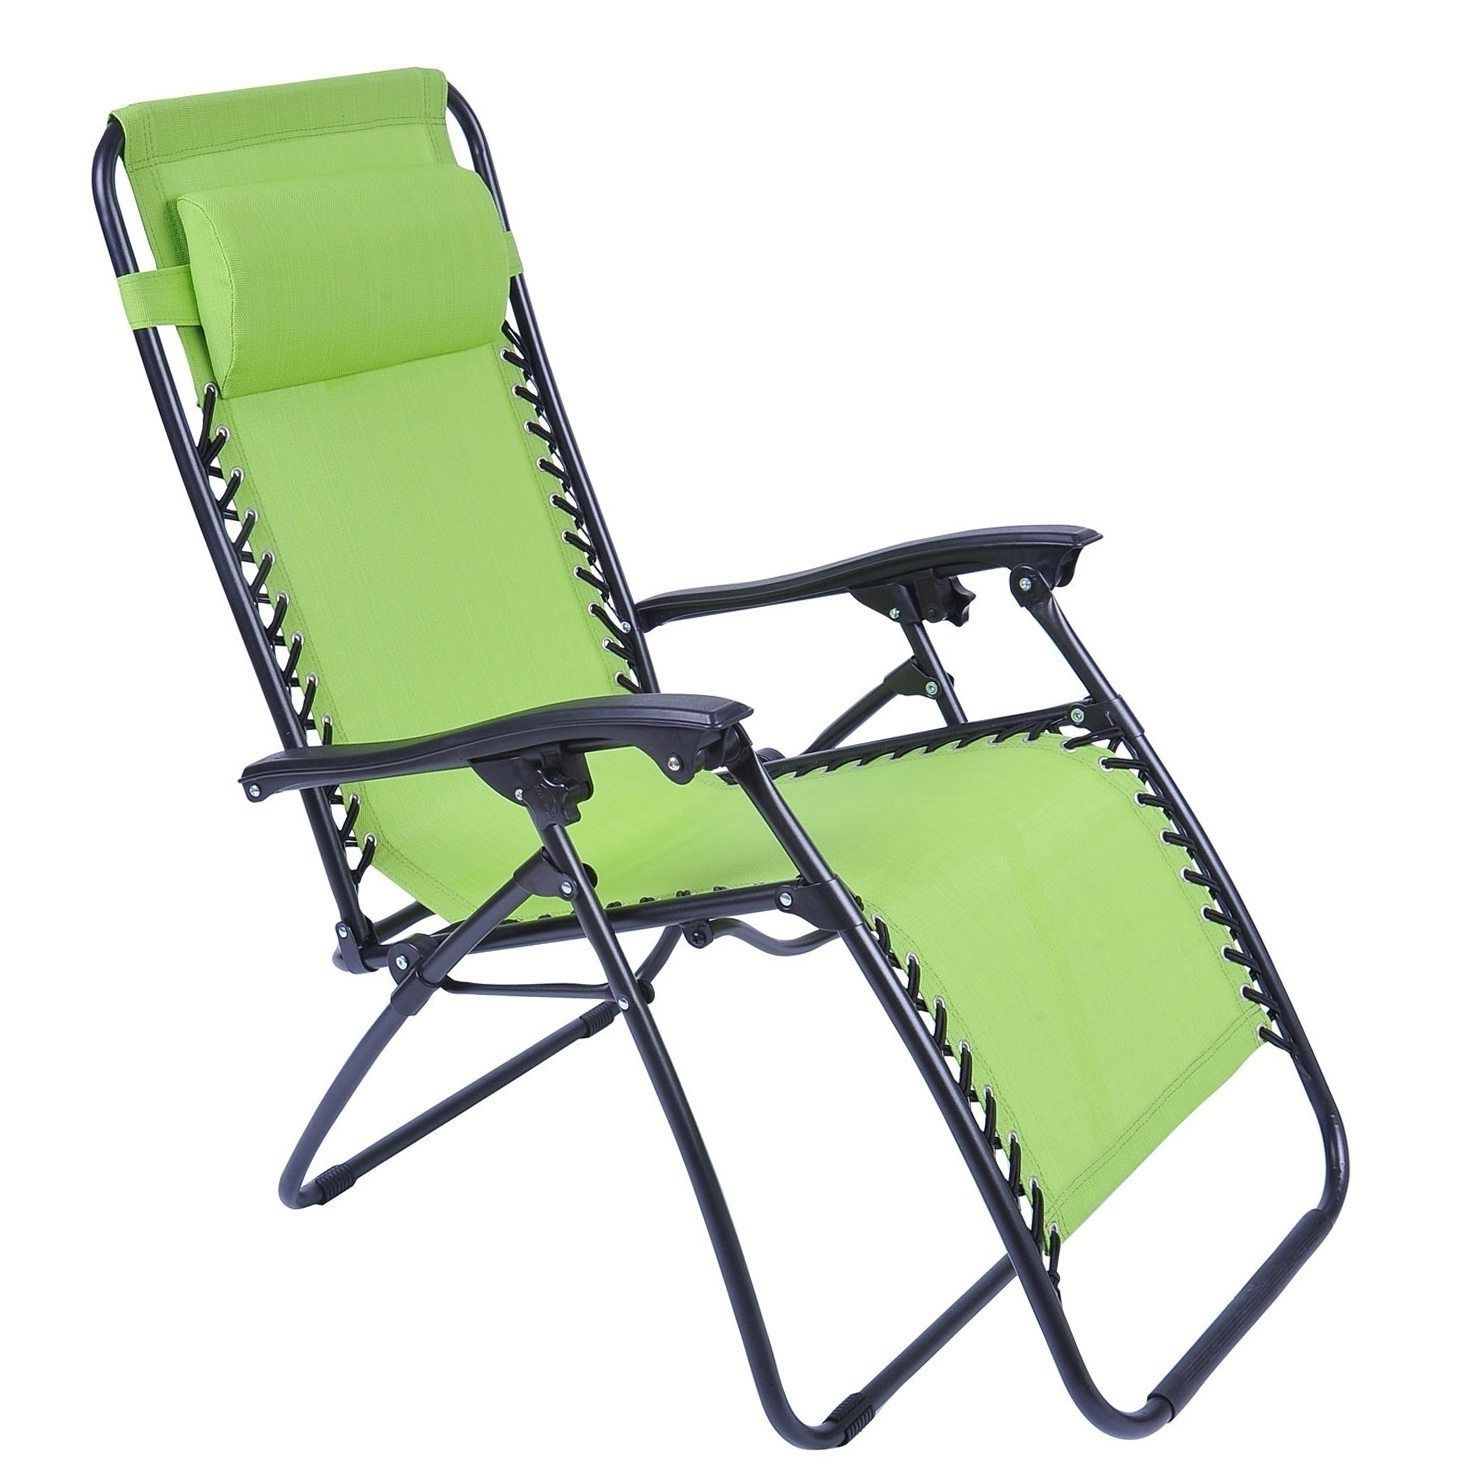 Fashionable Outdoor : Outdoor Lounge Chairs Clearance Beach Chairs On Sale With Jelly Chaise Lounge Chairs (View 4 of 15)